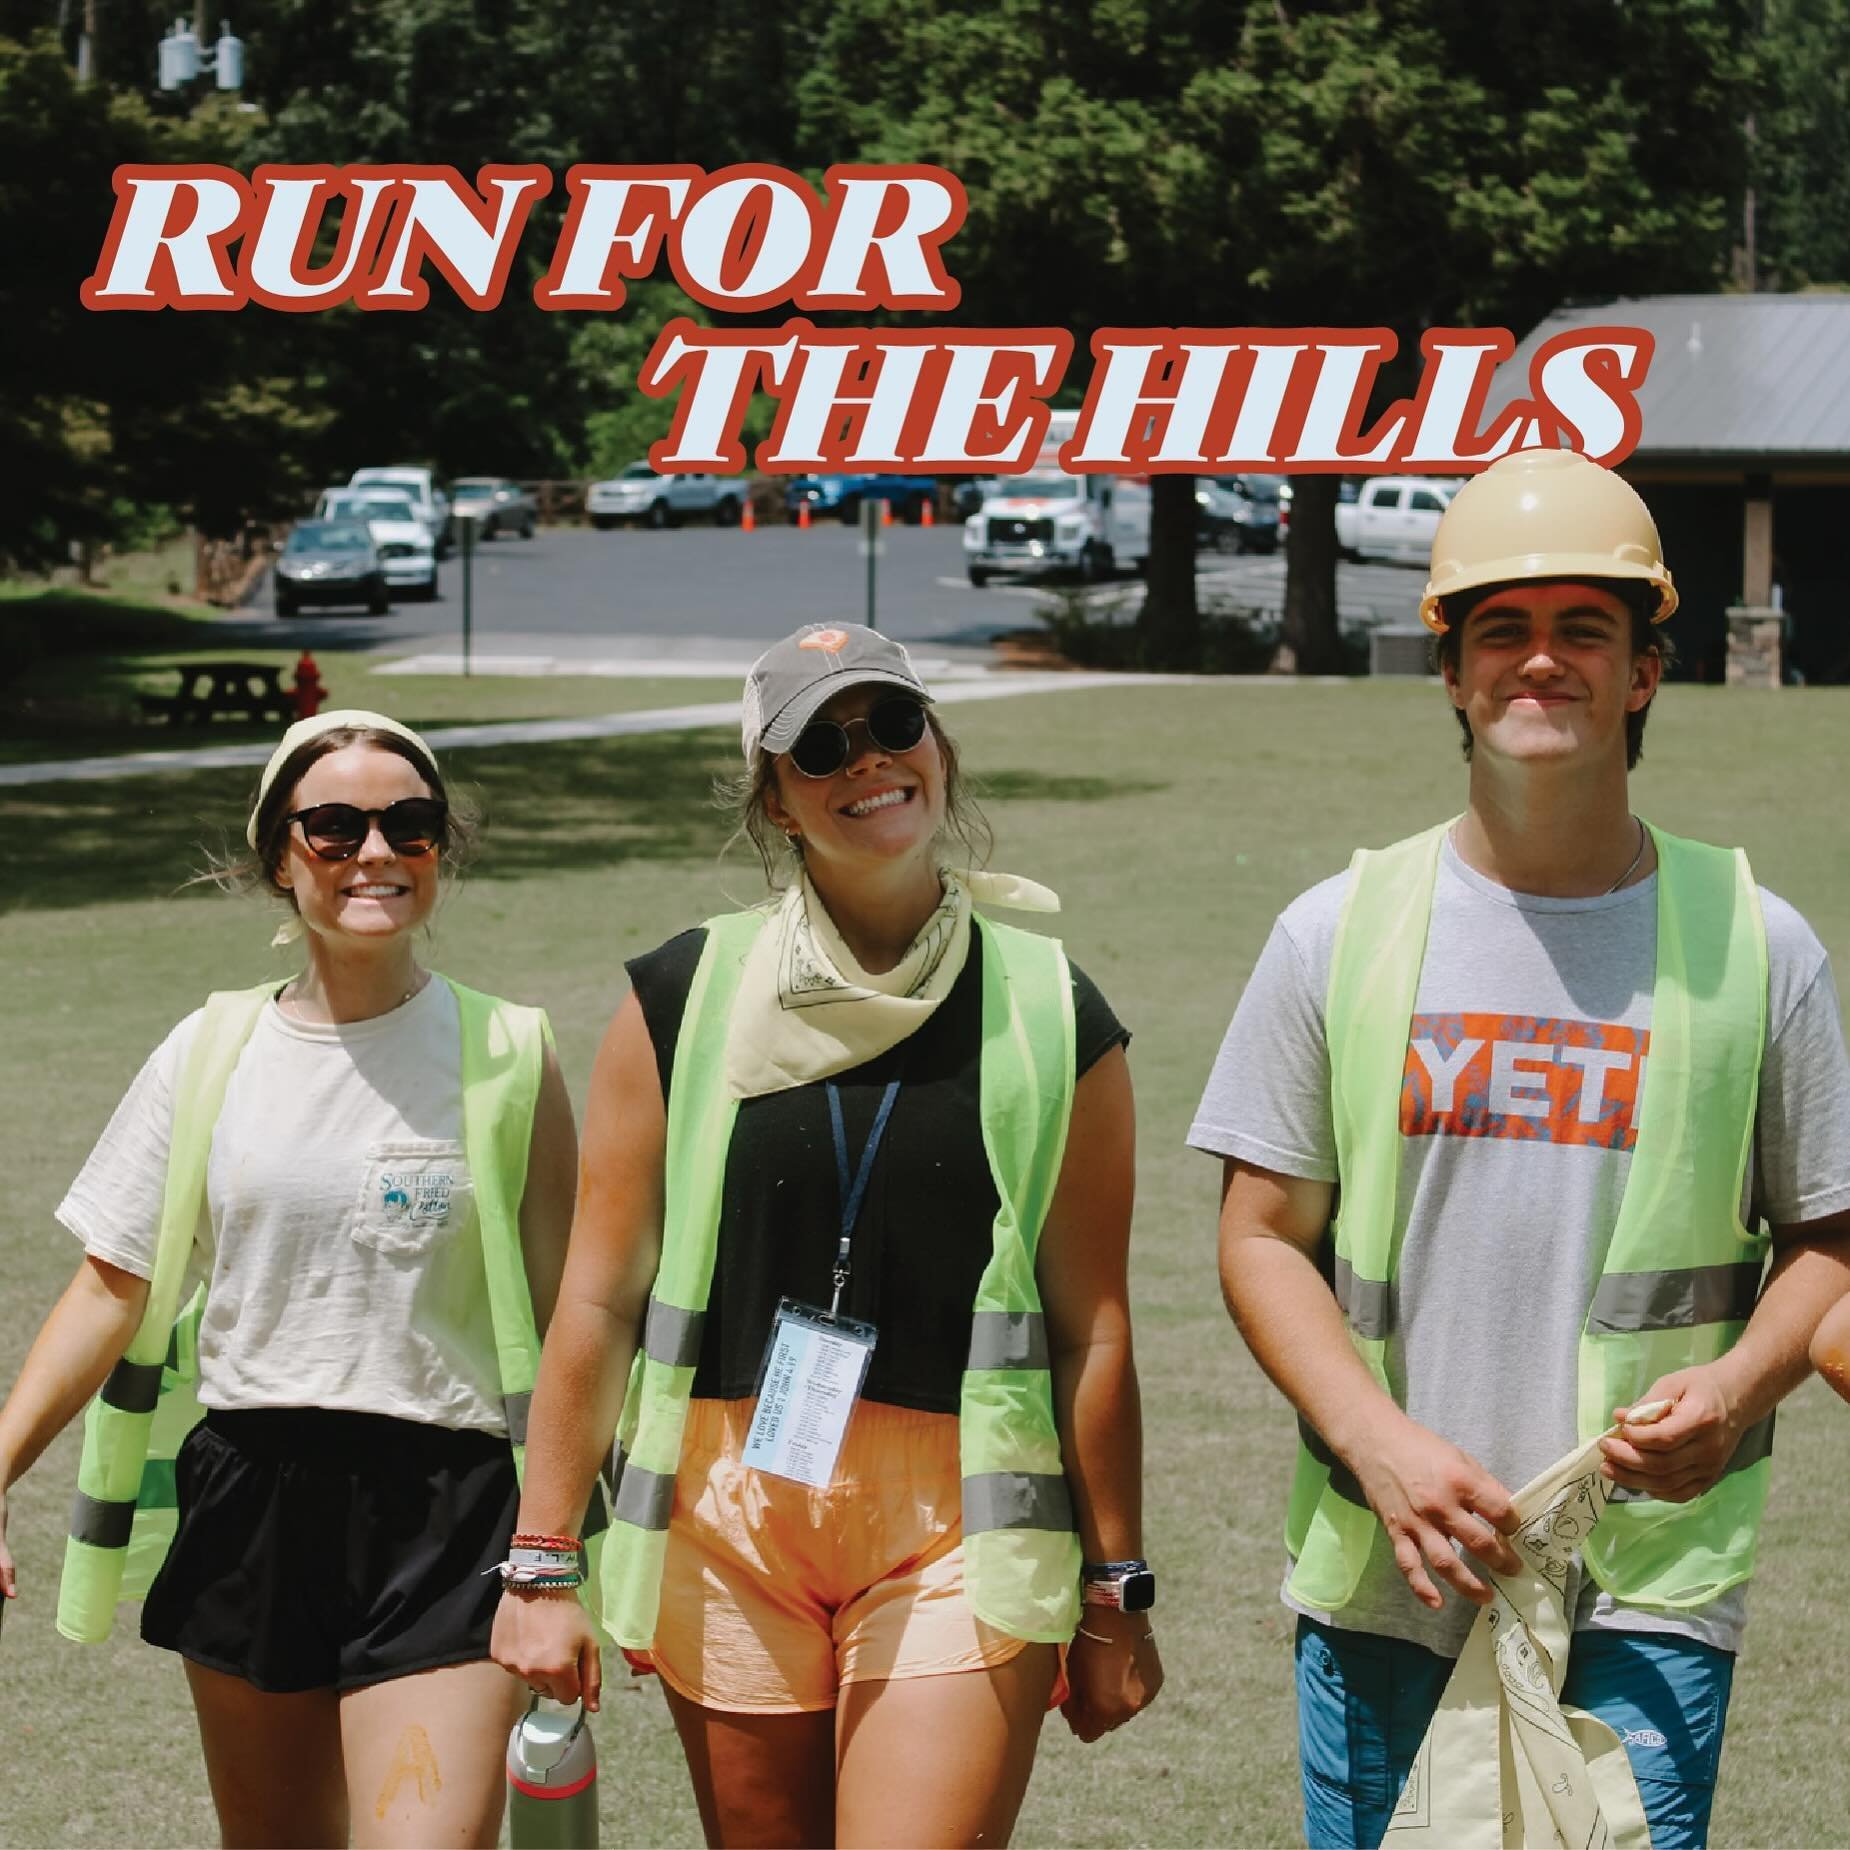 Run! For! The! Hills! This! Saturday! 🏃&zwj;♂️&zwj;➡️🏃&zwj;♀️&zwj;➡️🏃&zwj;➡️
Sign up using the linktree in our bio and run (or walk 😁) in support of The Hills! See you there 🙌